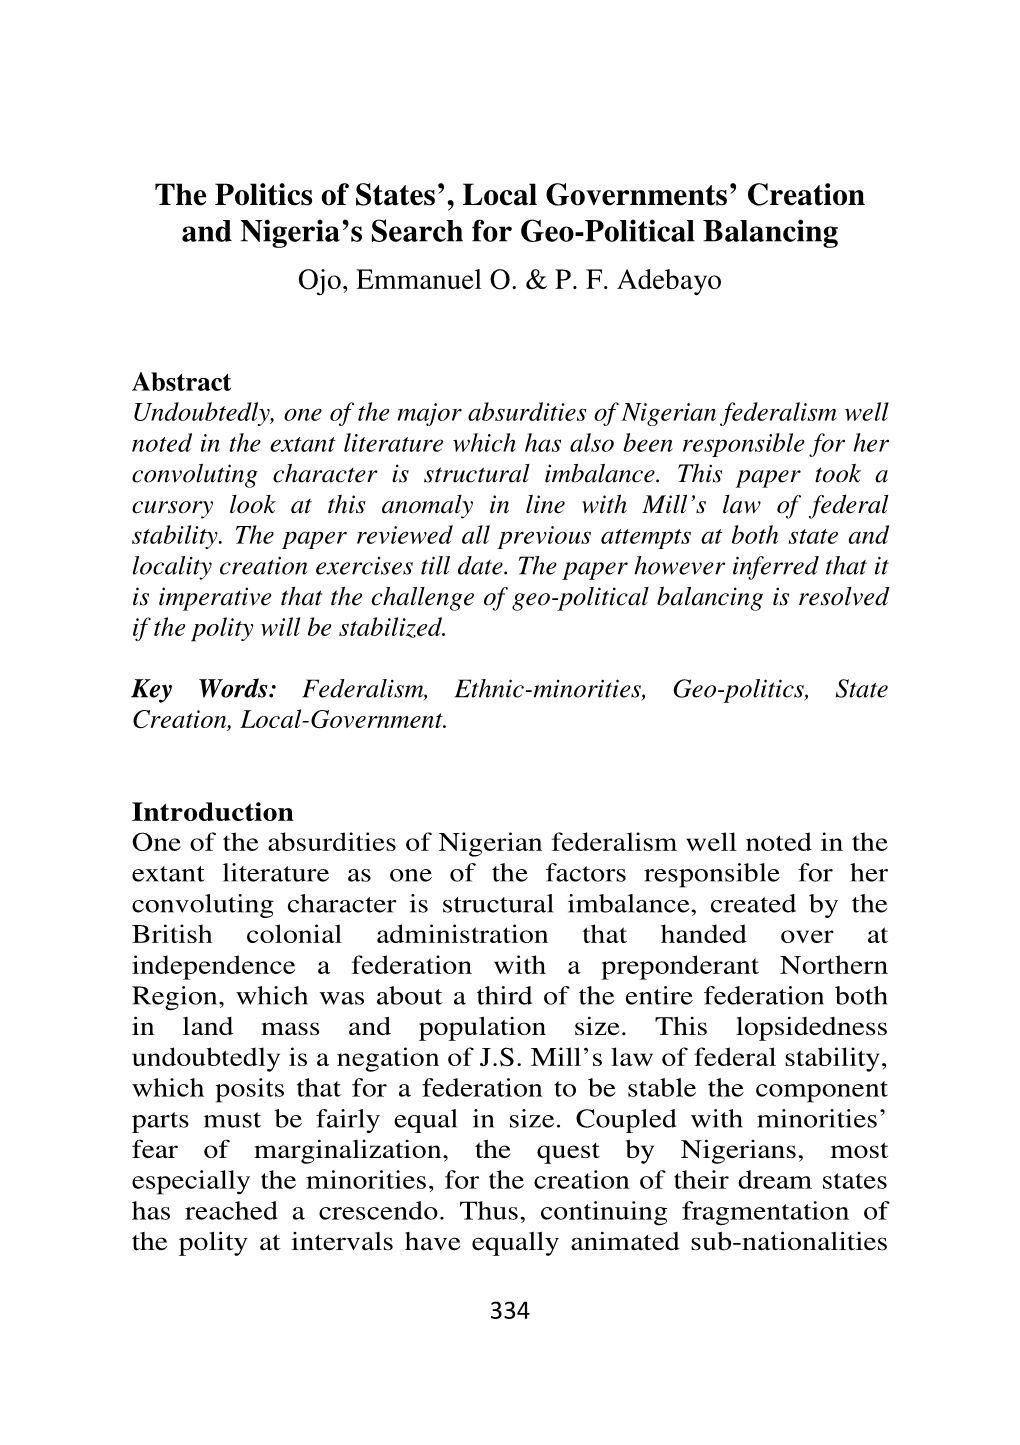 The Politics of States', Local Governments' Creation and Nigeria's